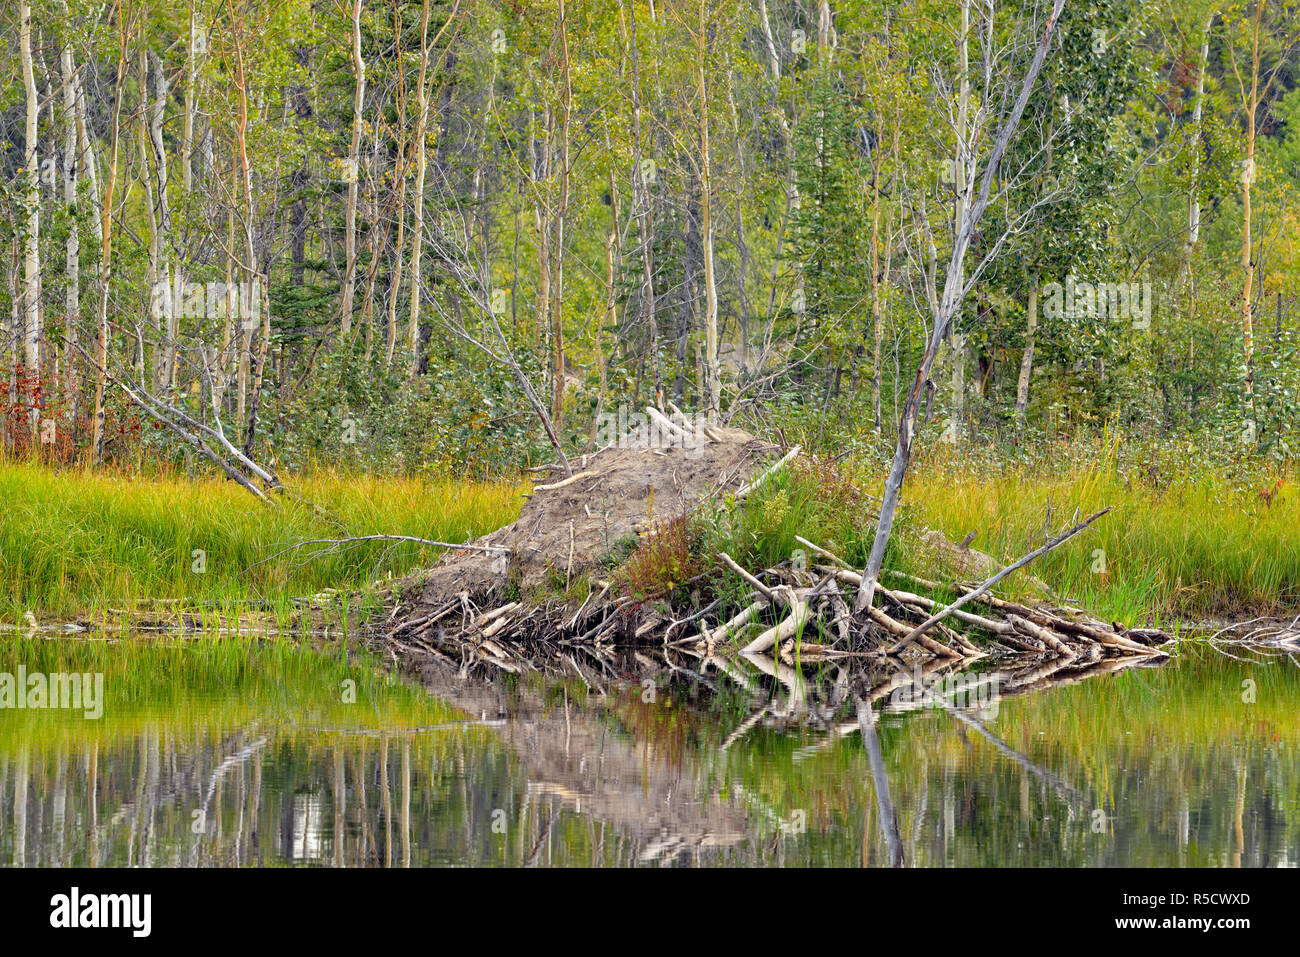 Beaver lodge in pond at shoreline, Highway 3 to Yellowknife, Northwest Territories, Canada Stock Photo